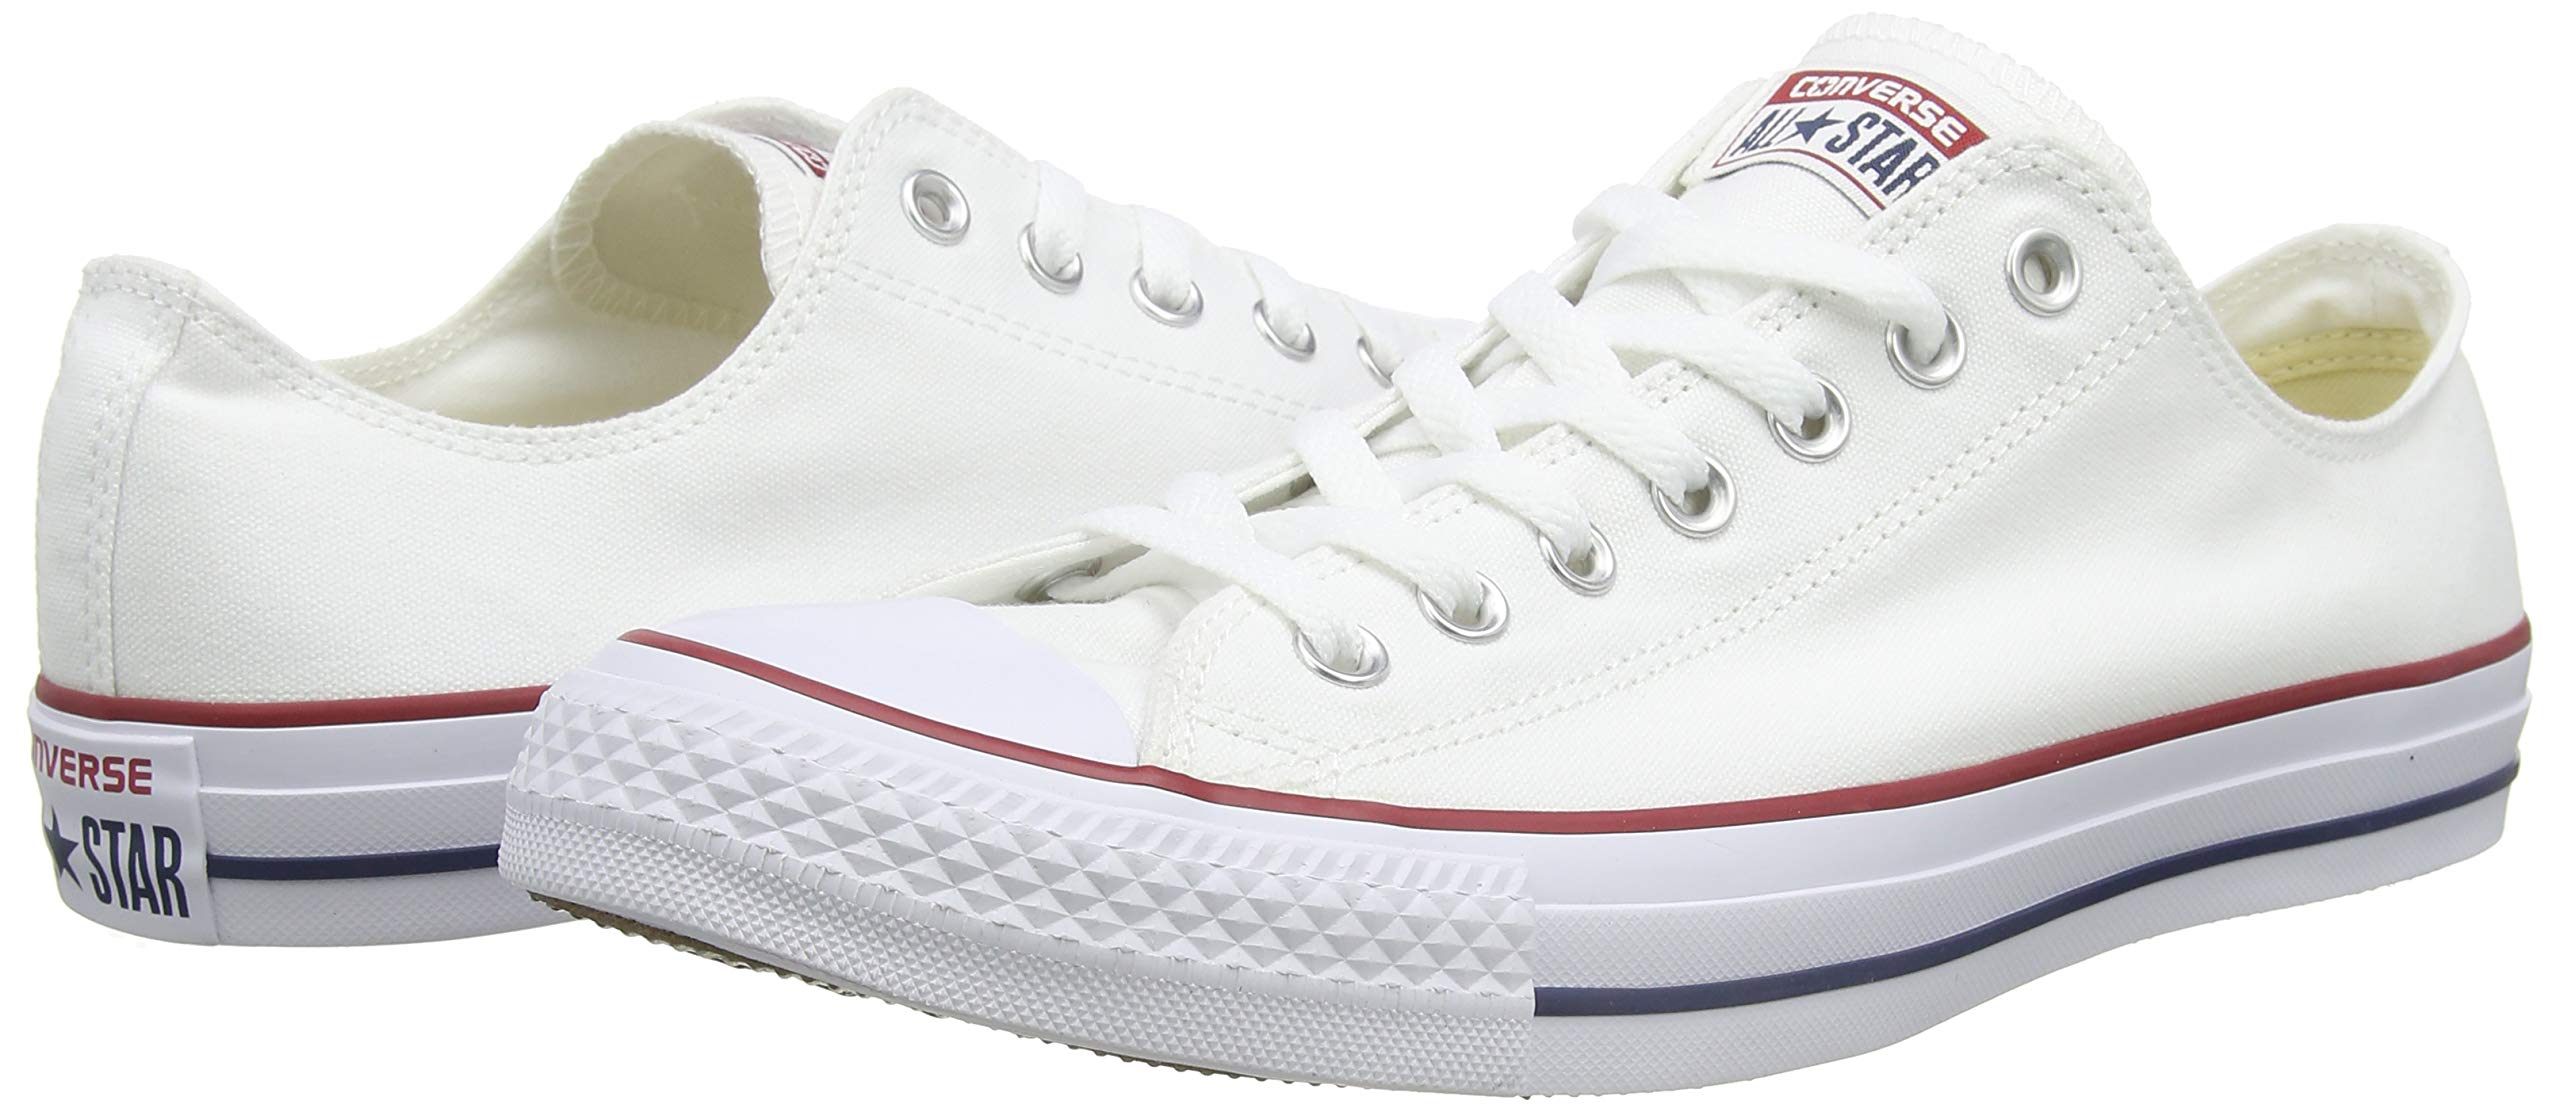 Converse unisex-adult Chuck Taylor All Star Low Top